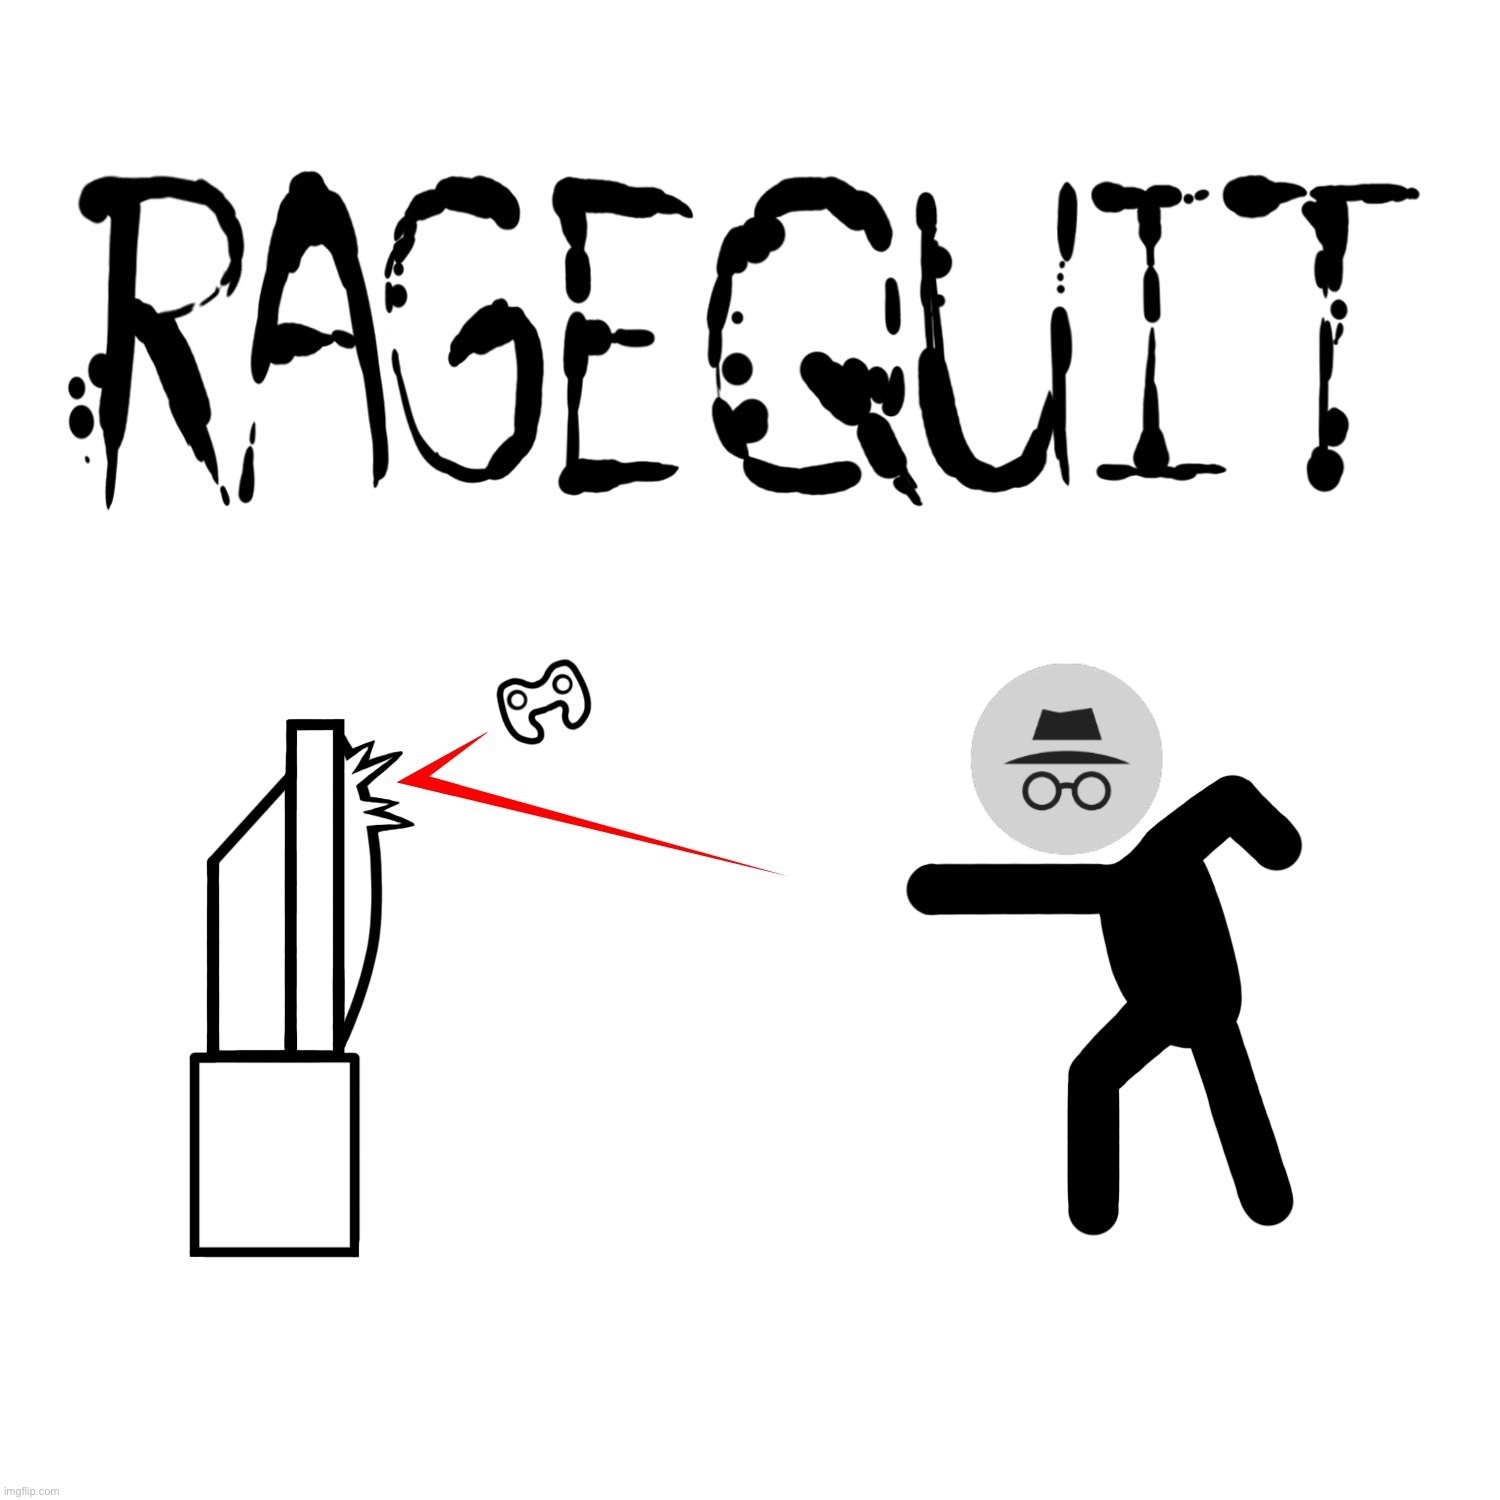 ragequit | image tagged in ragequit | made w/ Imgflip meme maker